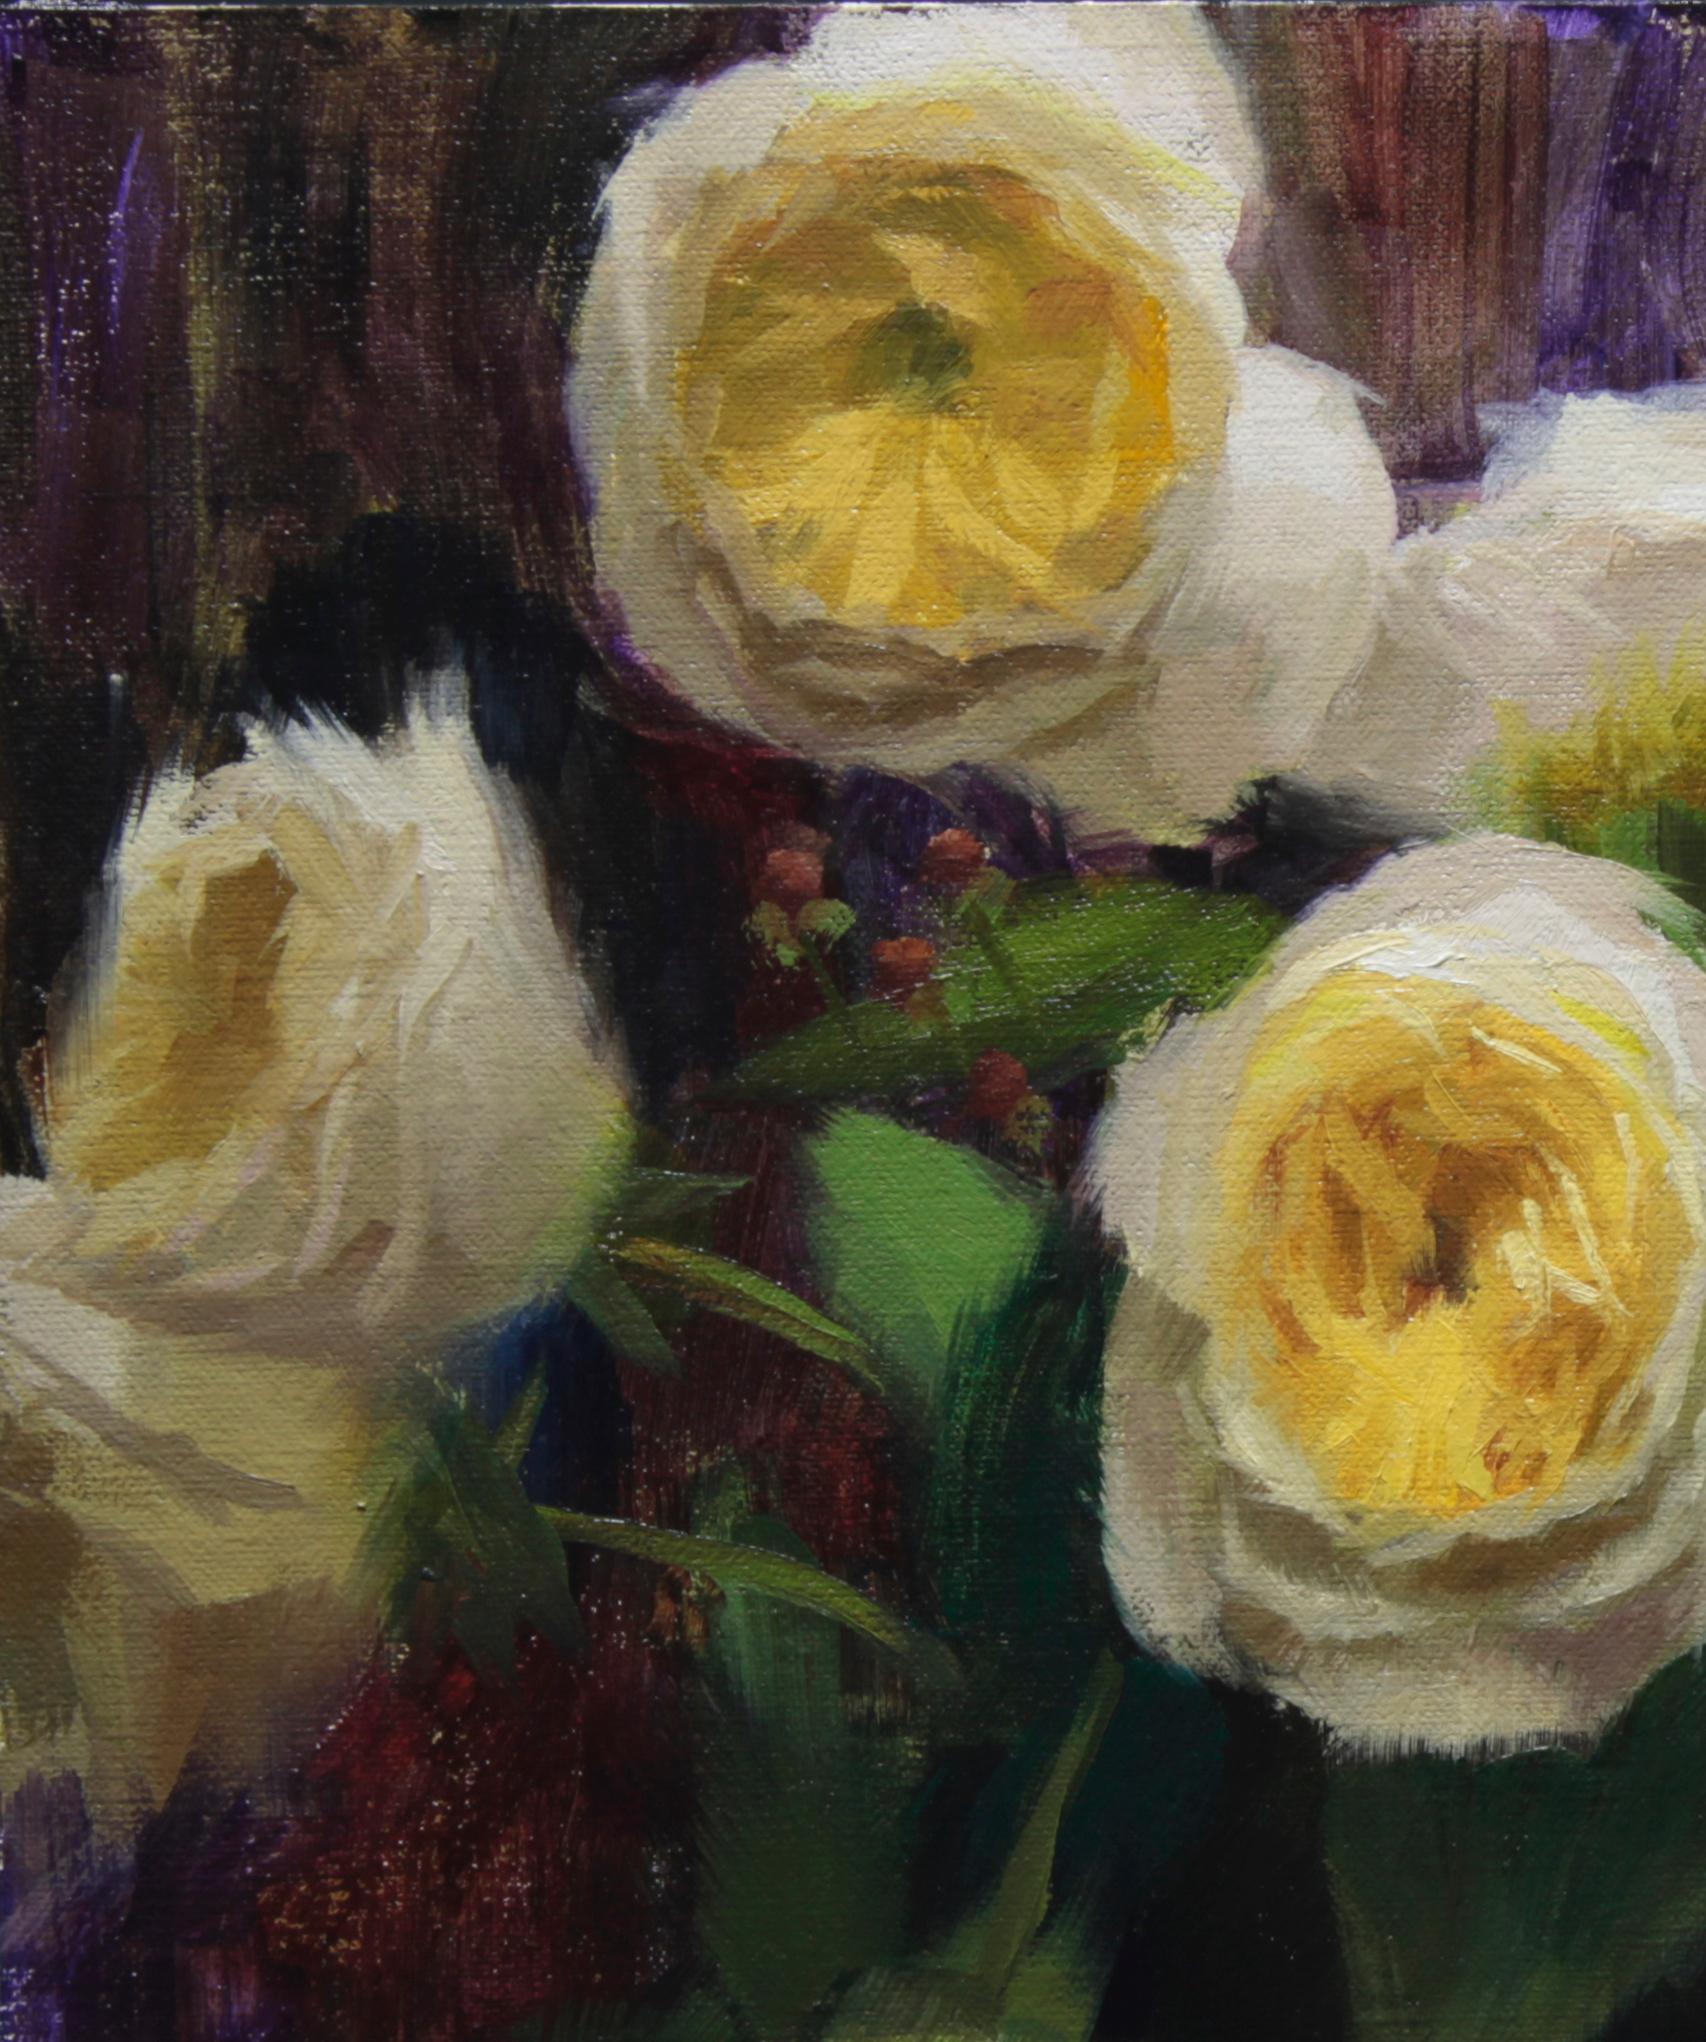 Garden of Roses, Floral Painting, Representational Oil Painting, SW ART  - Black Still-Life Painting by Zac Elletson